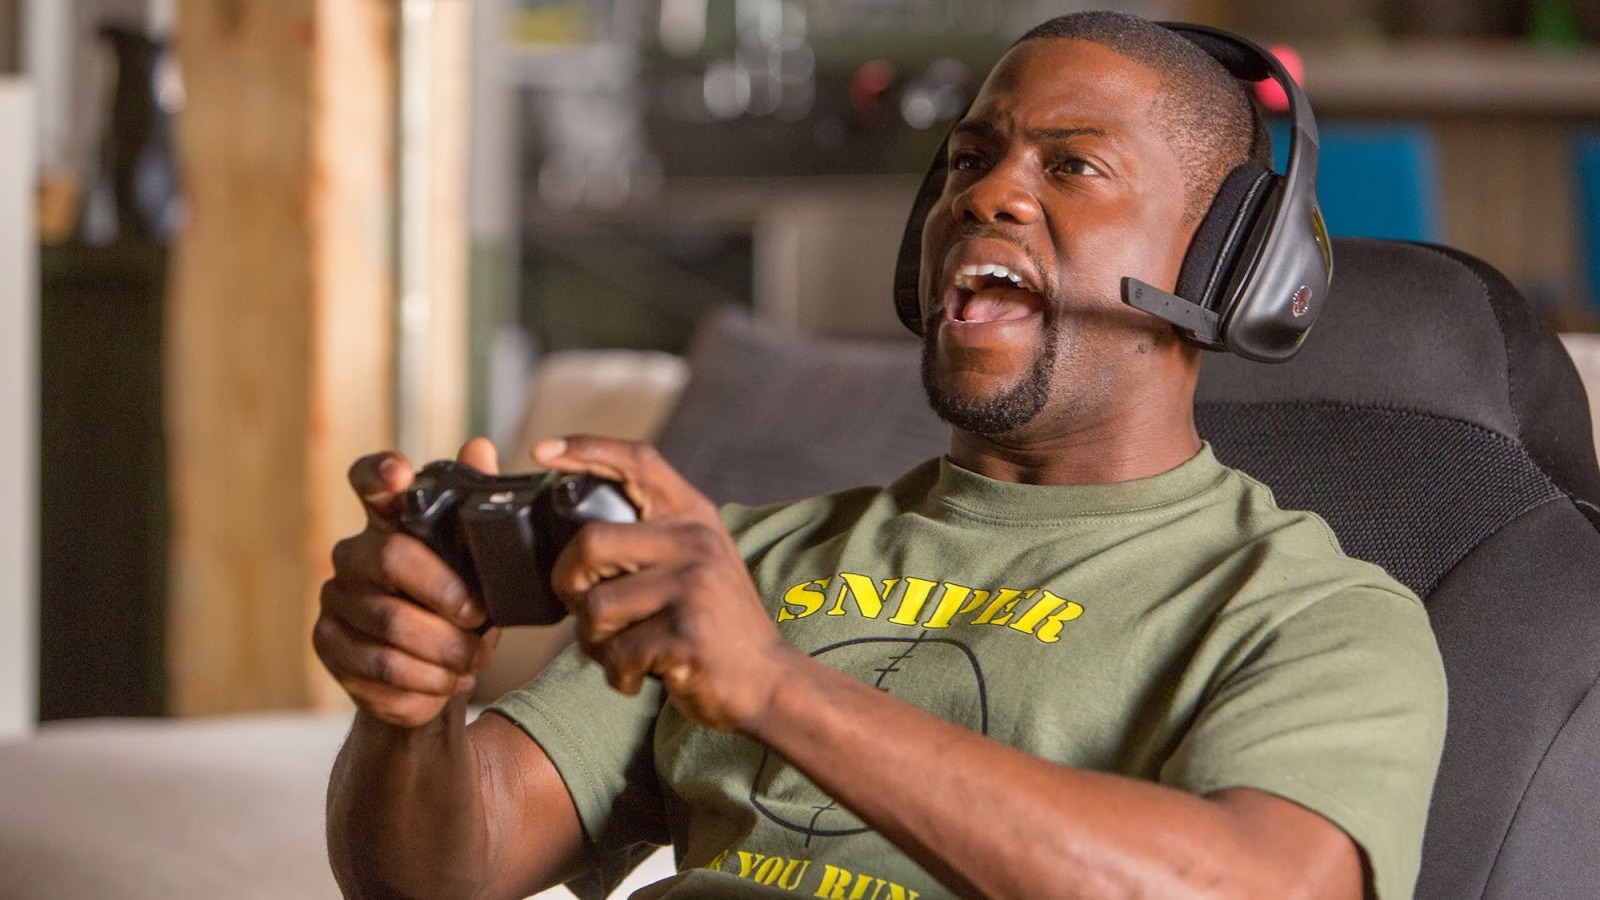 Monopoly Movie Starring Kevin Hart Is Still In Development, Says Director Tim Story [Exclusive]